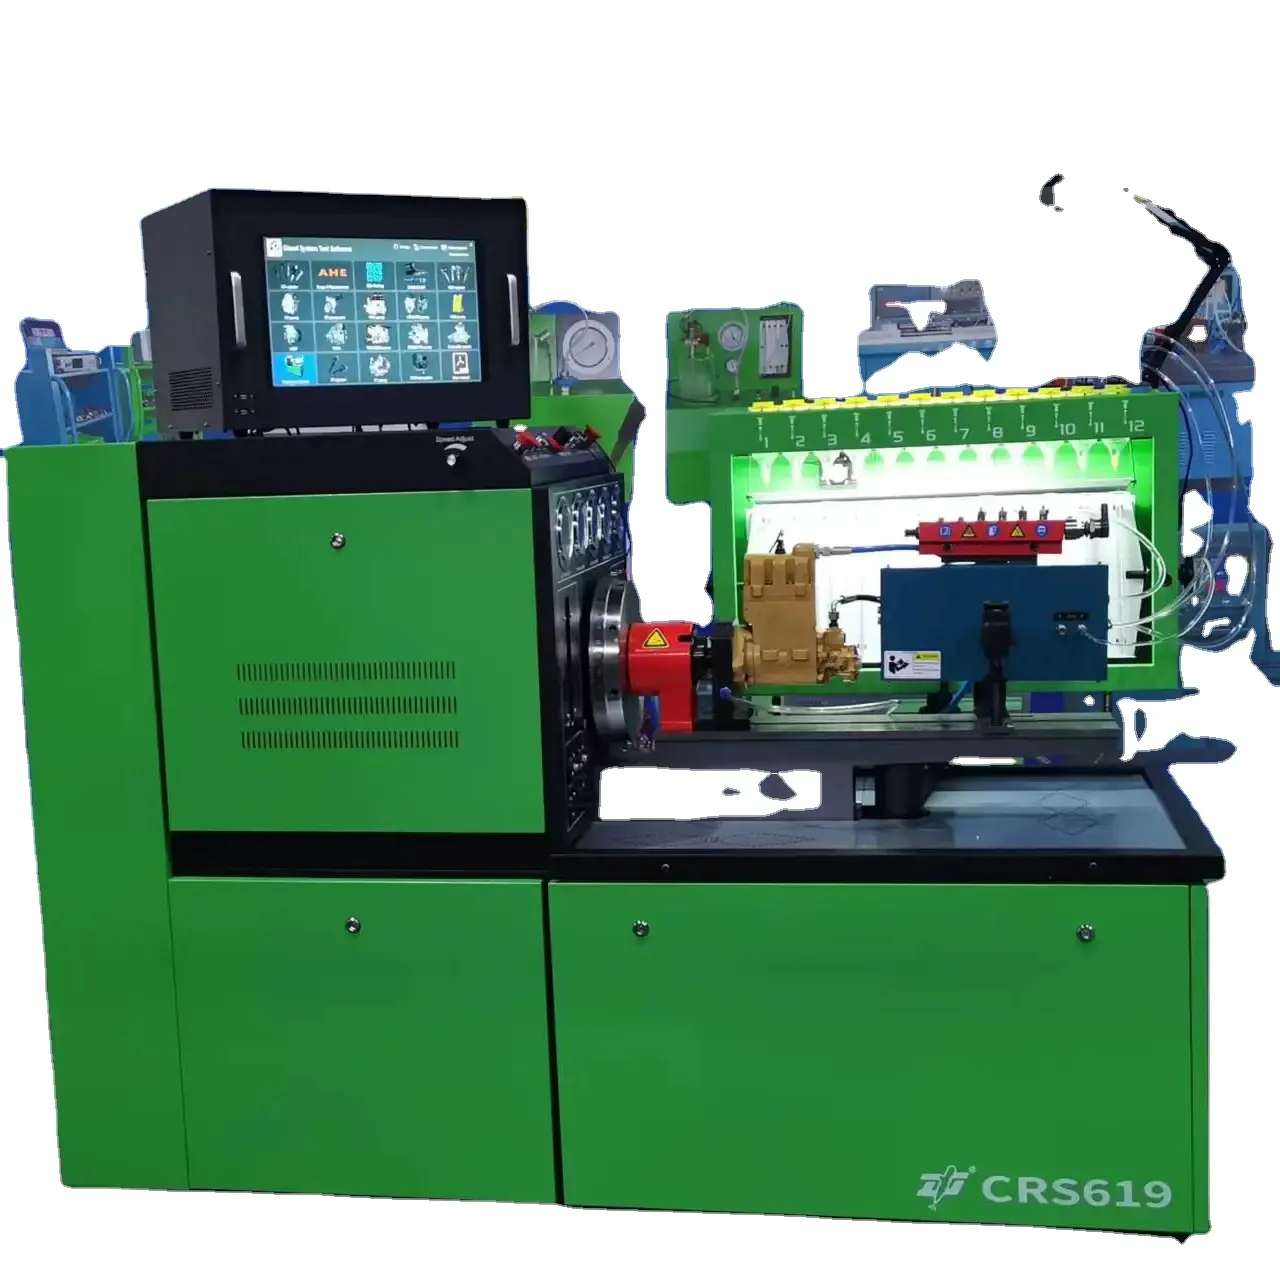 Dongtai Machine Manufacturer Computer Model CRS619 Diesel Injection Pump Test Bench with Common Rail Injector and Pump Function,